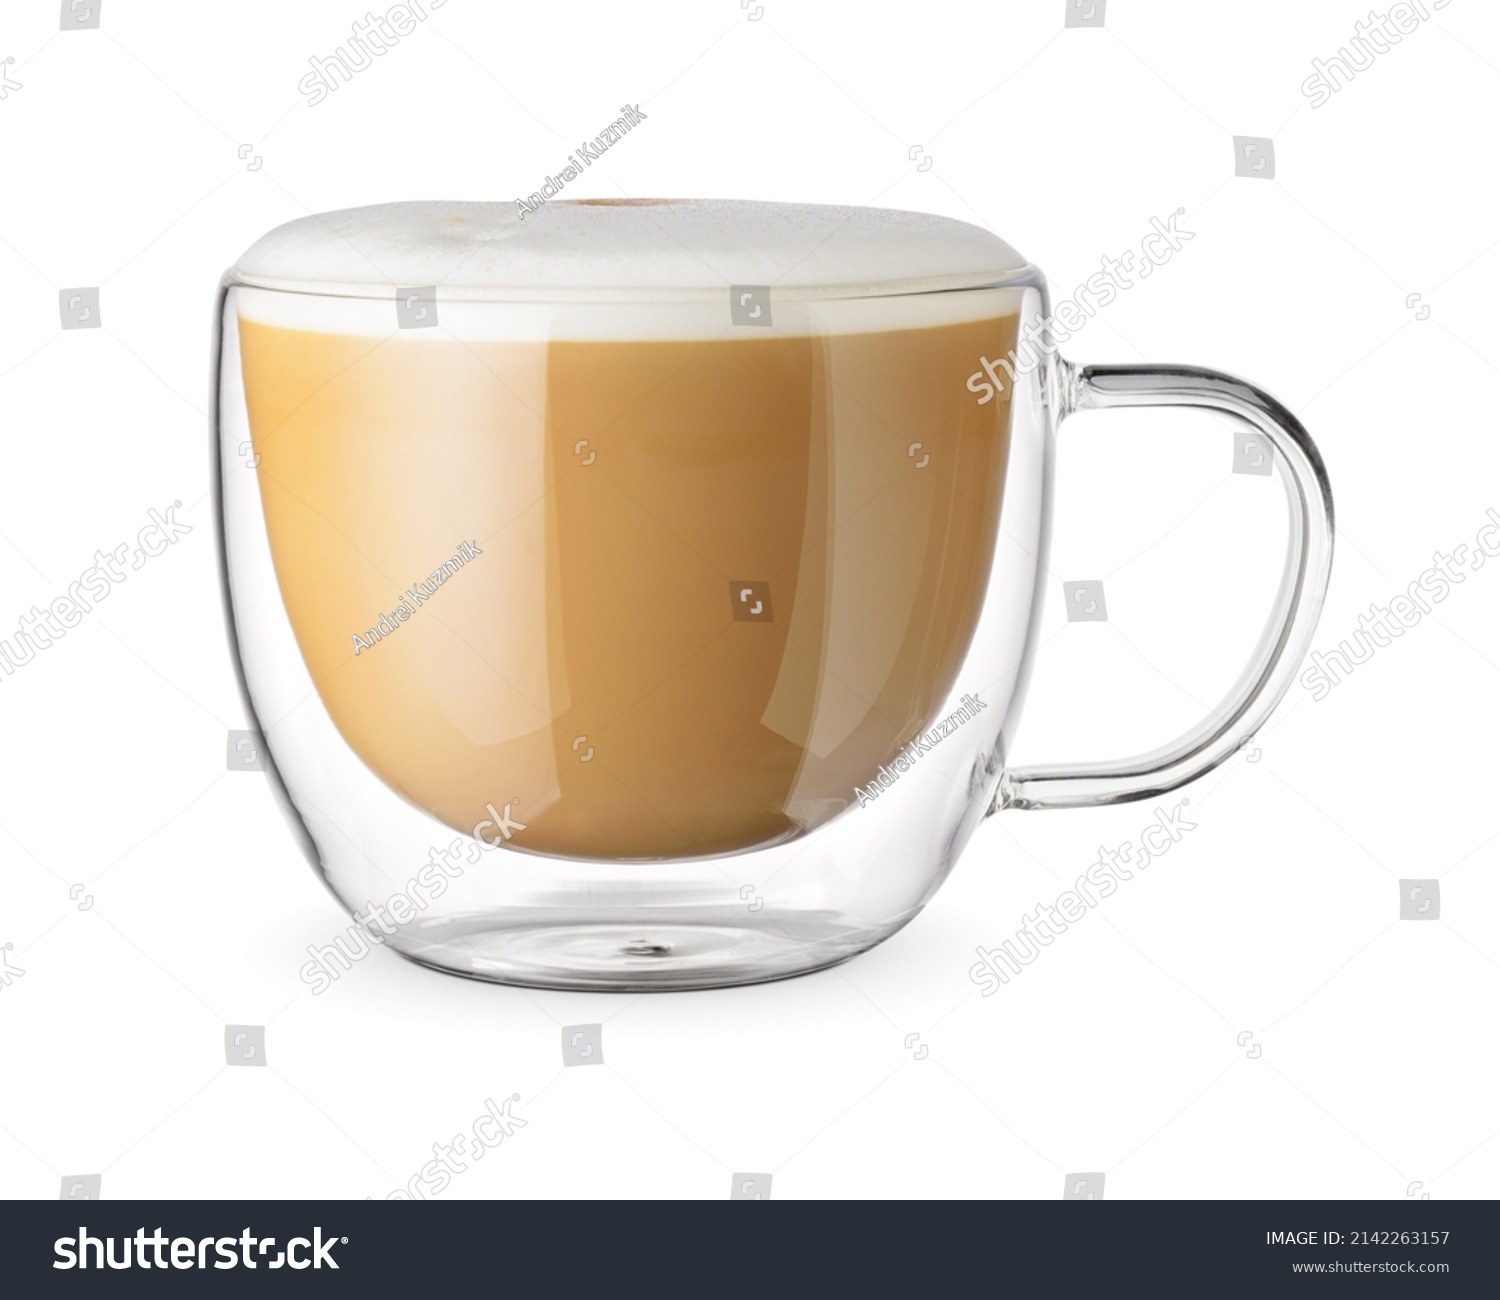 Flat white coffee in a transparent double wall glass cup isolated on white background. #2142263157